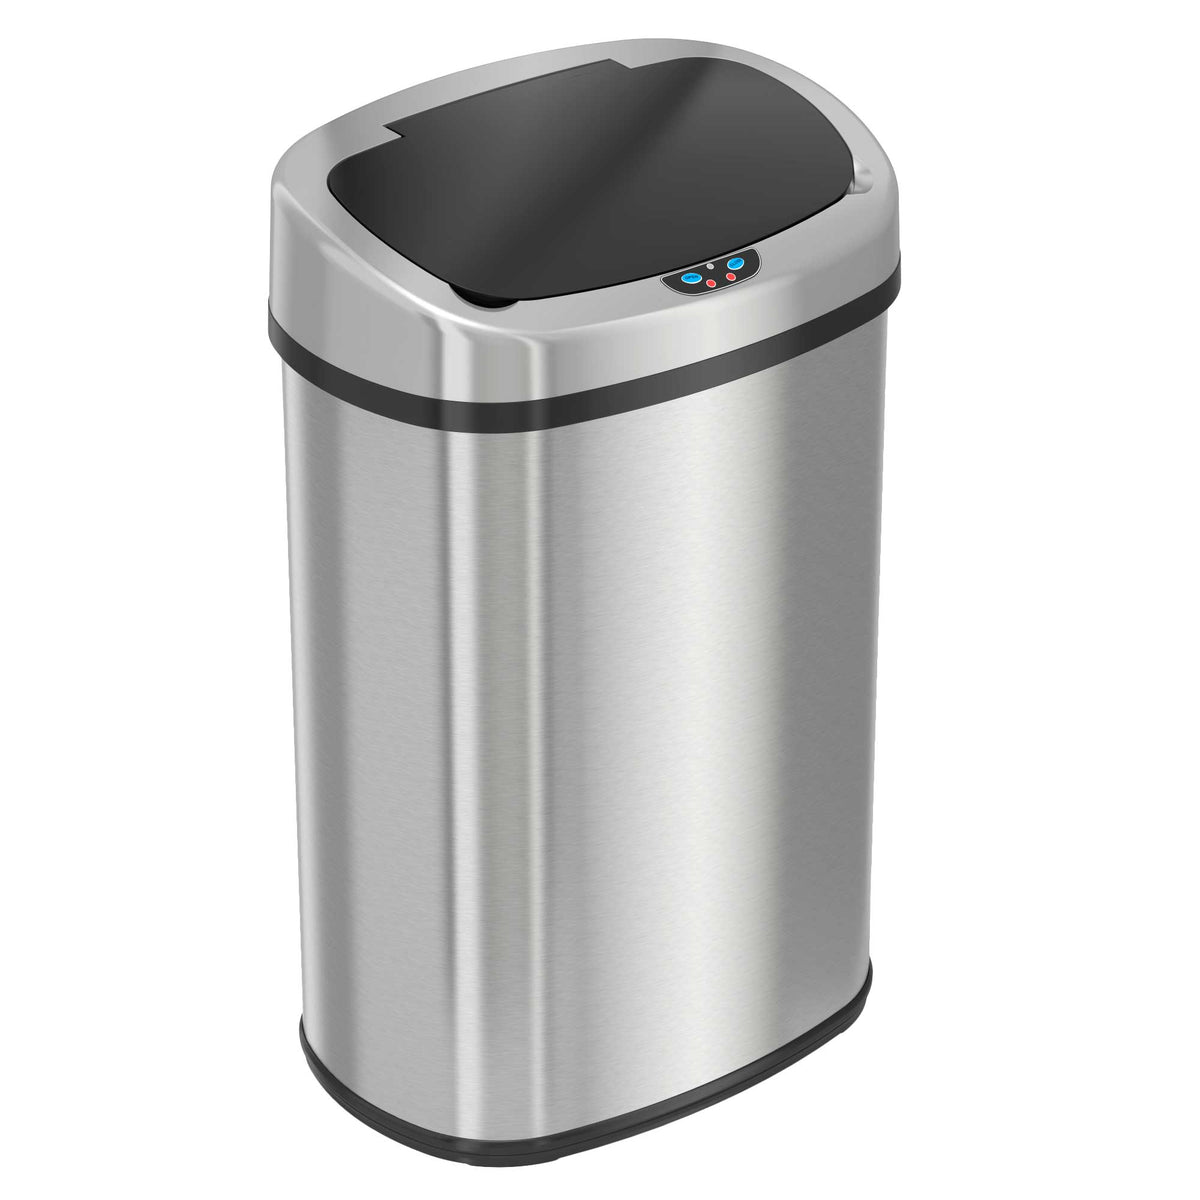 iTouchless 13 Gallon Oval Sensor Trash Can with Odor Filter